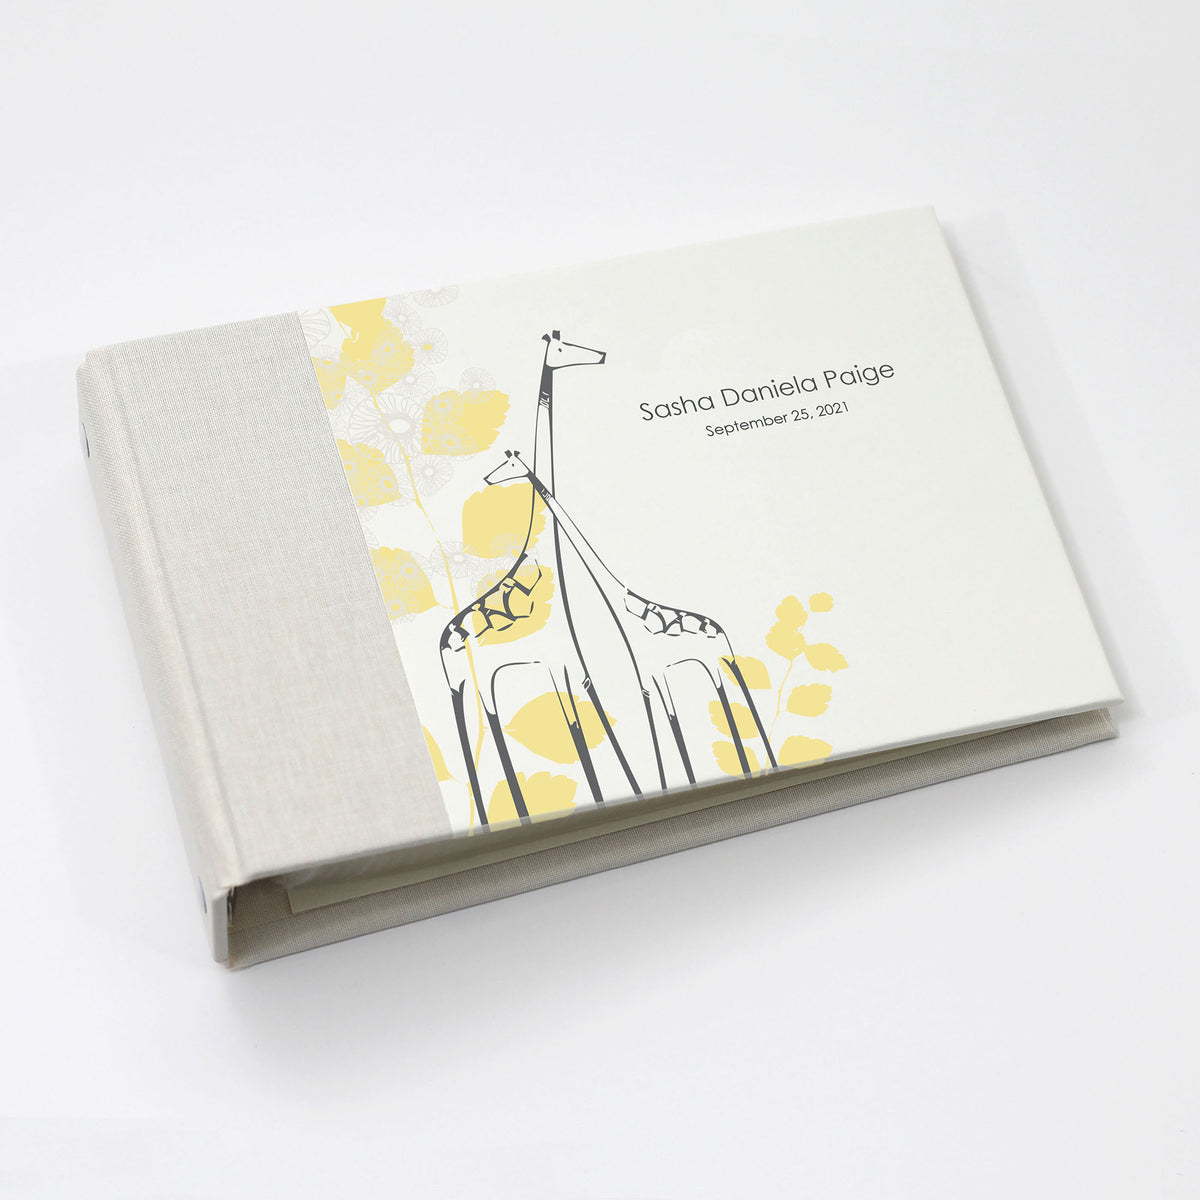 Small Photo Binder | Printed Cover: Yellow Giraffe | 4x6 Photos | Available Personalized